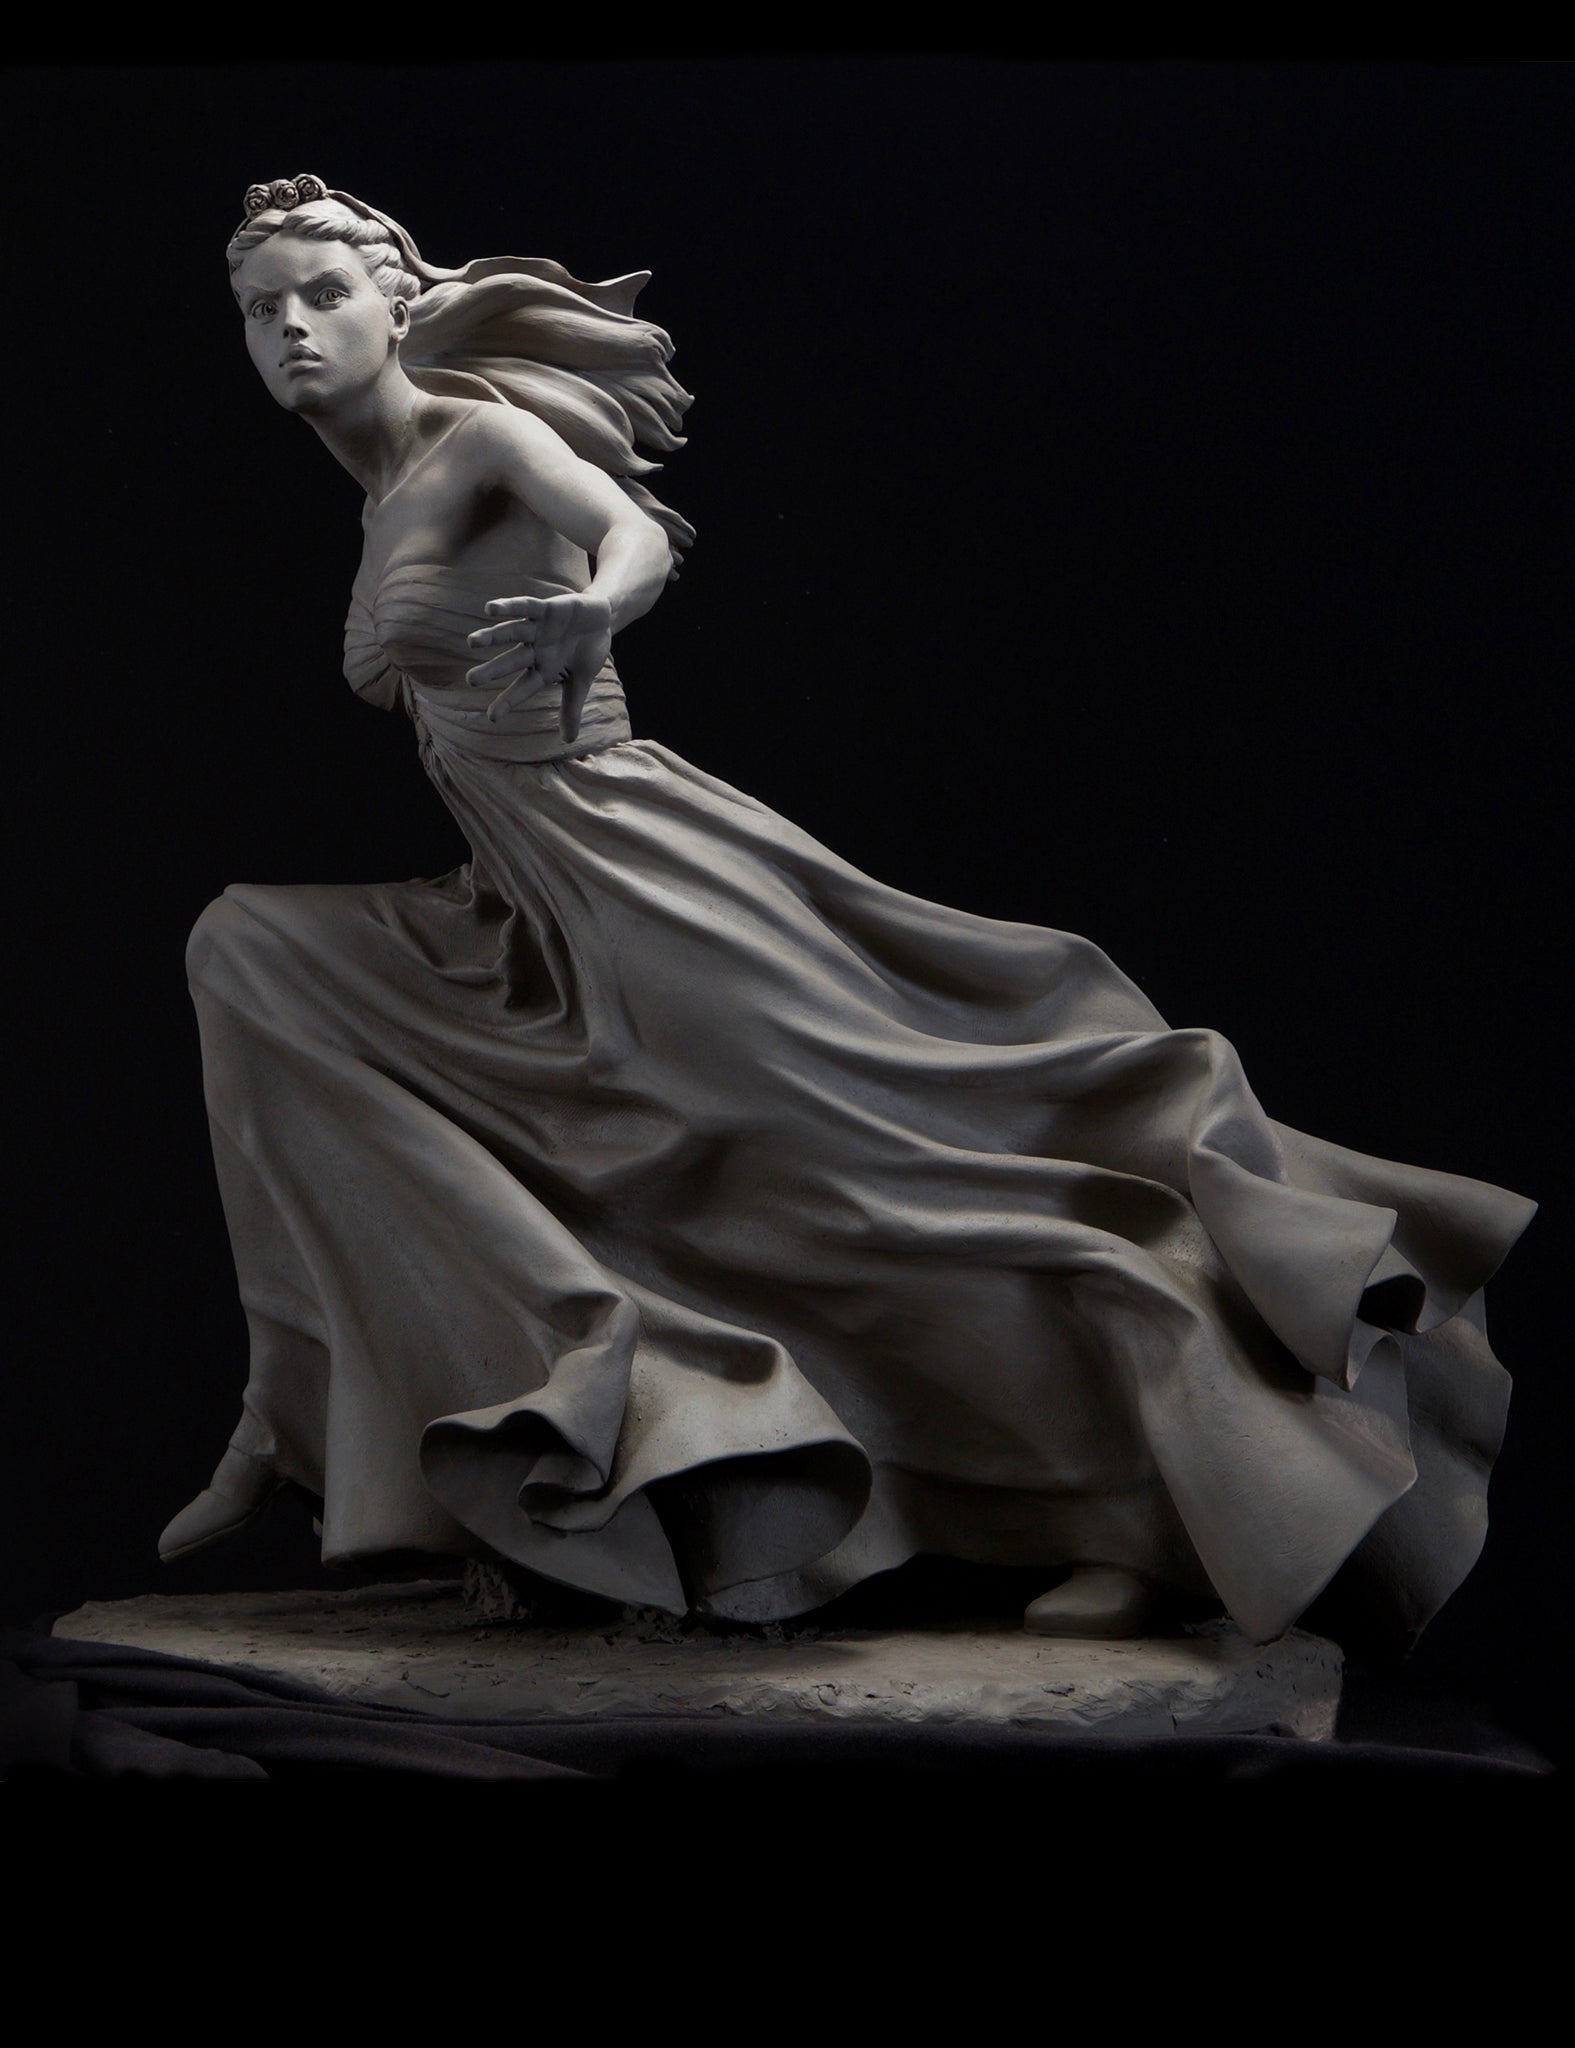 Philippe Faraut sculpture "I Don't" from Book 4: Figure Sculpting Volume 2: Gesture & Drapery Techniques in Clay